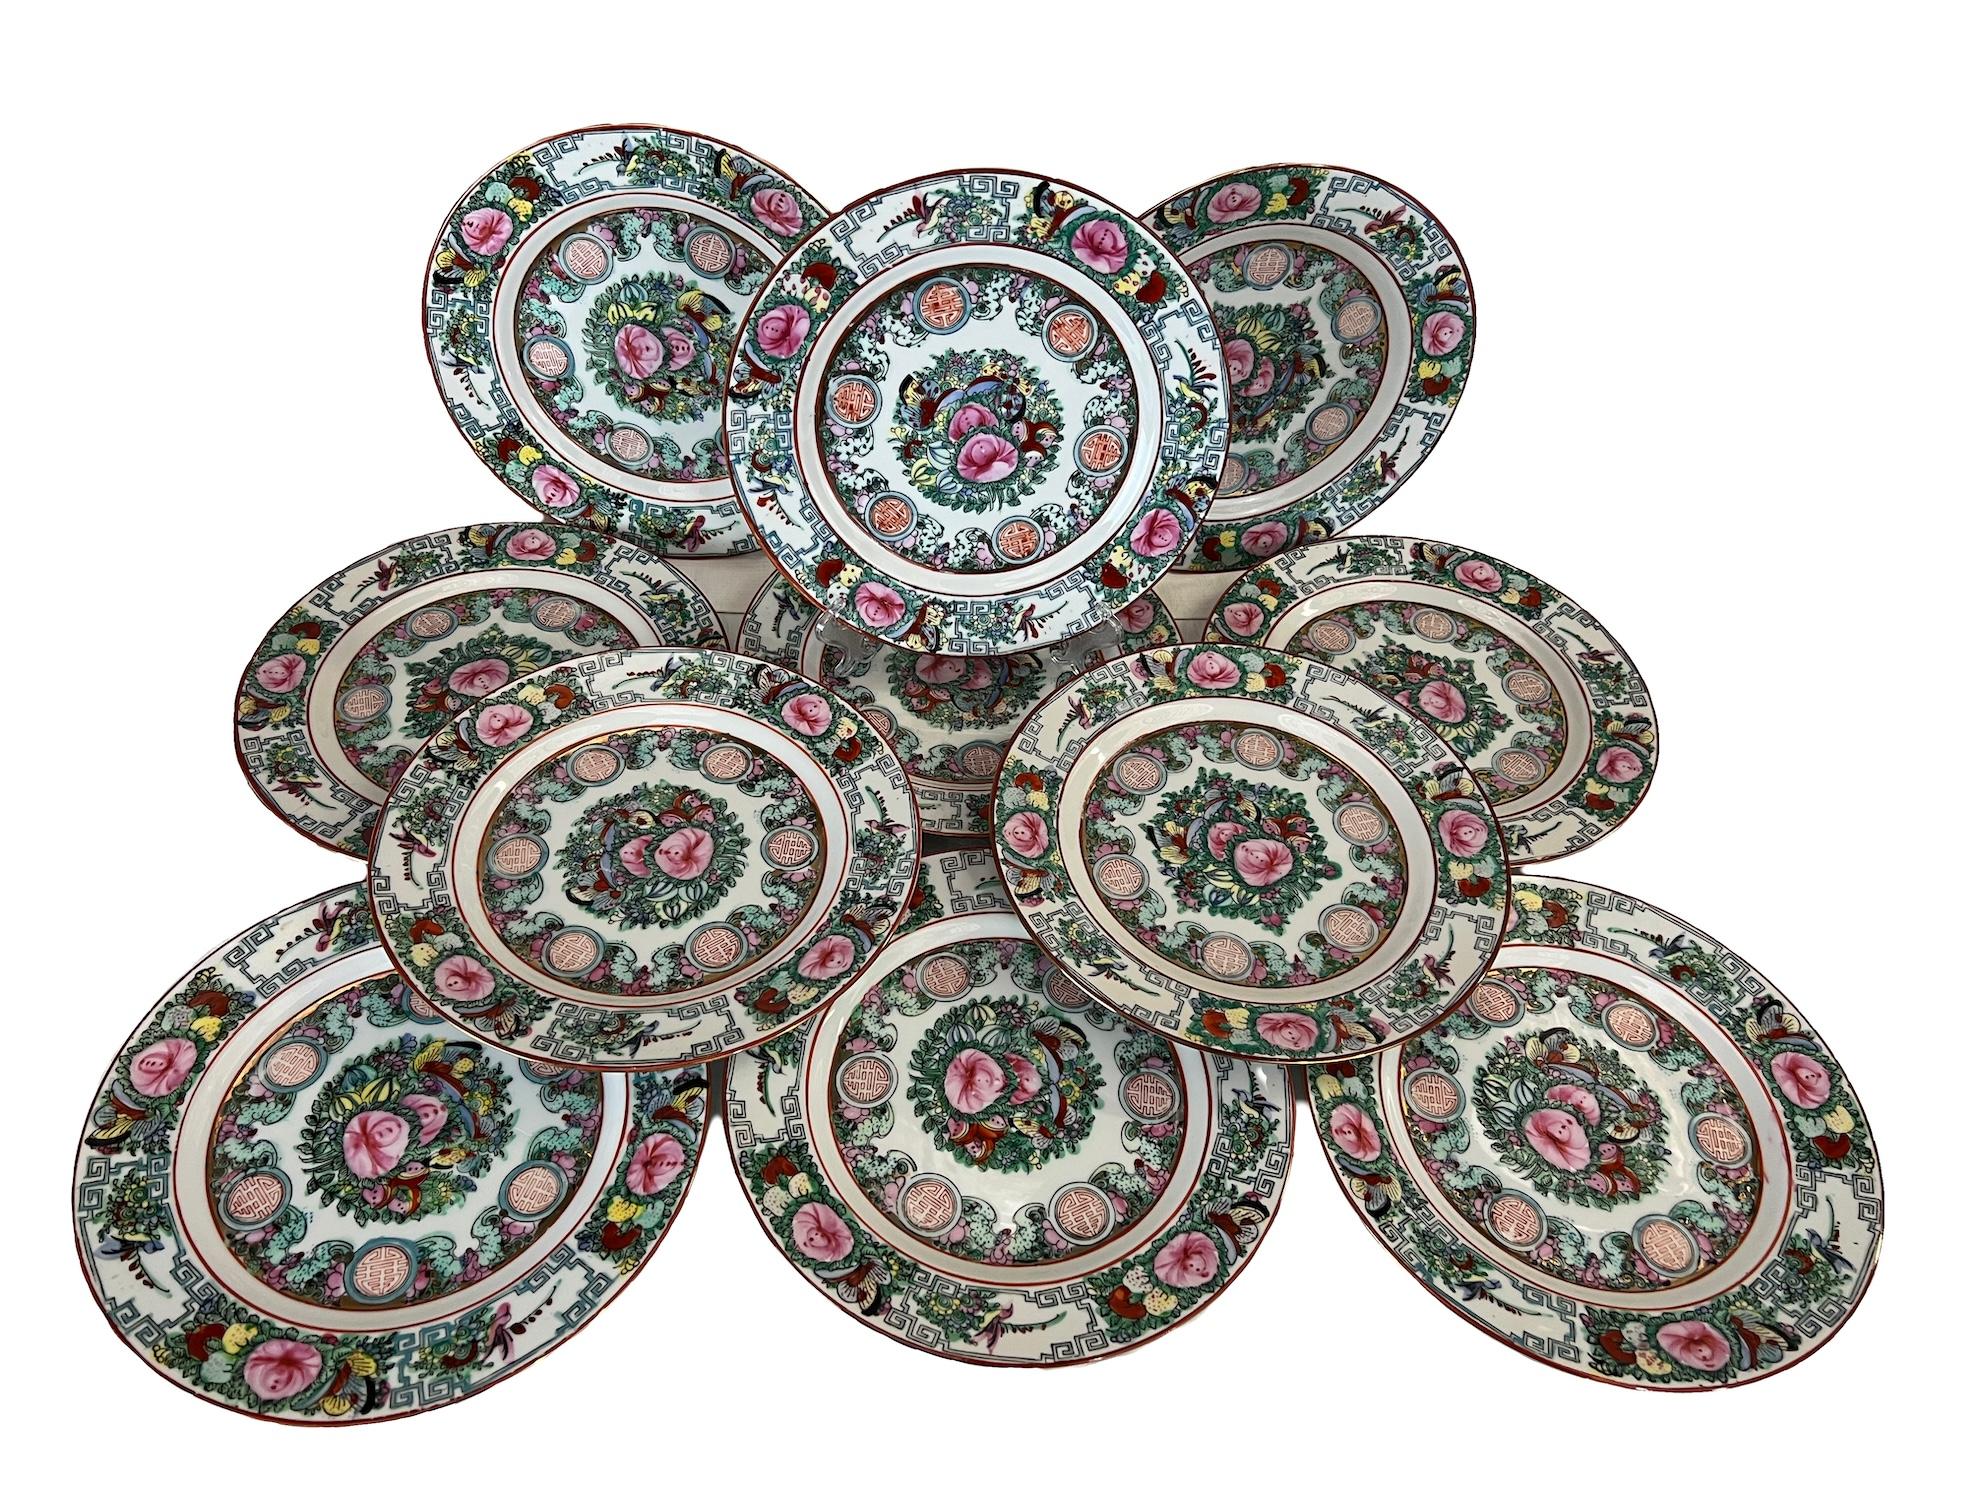 Set of 10 Chinese porcelain dinner plates. These Guang Cai plates, also known as 'three-color plates' or 'family rose plates' in Chinese, are a type of Chinese porcelain known for its vibrant color palette and intricate decoration. These plates are